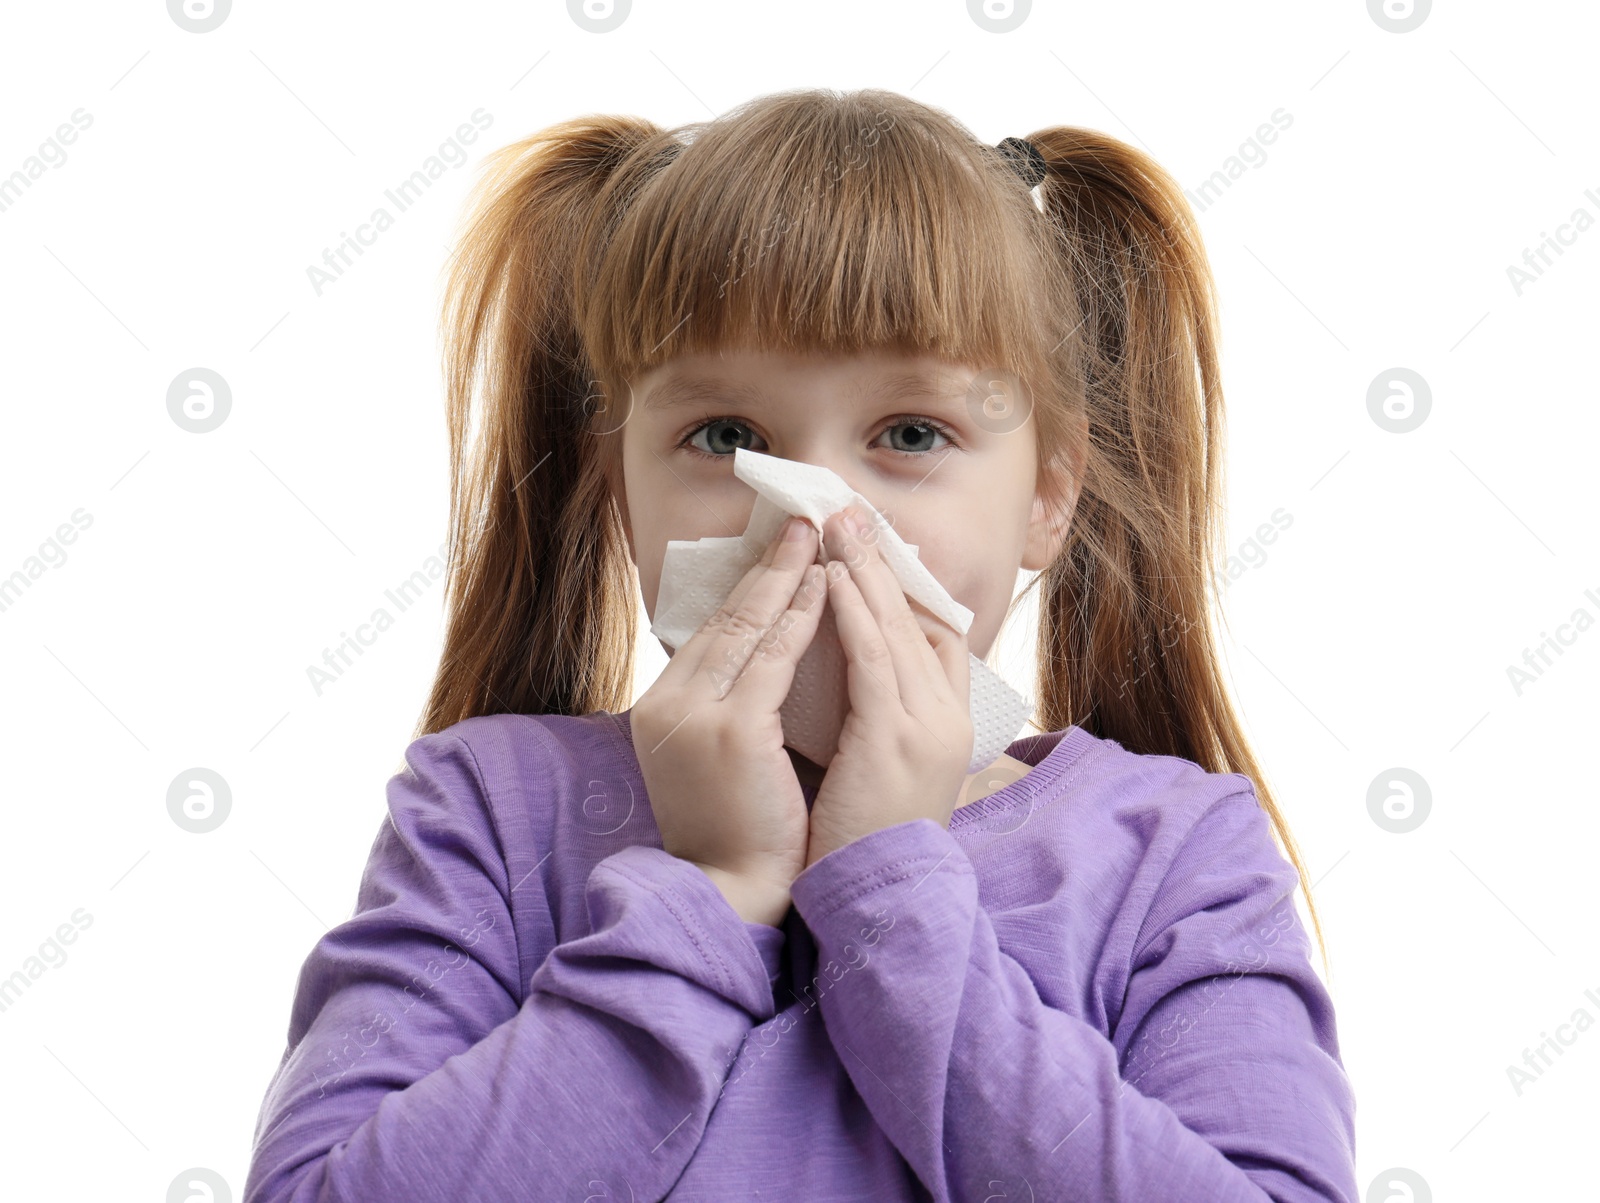 Photo of Cute little girl blowing nose against white background